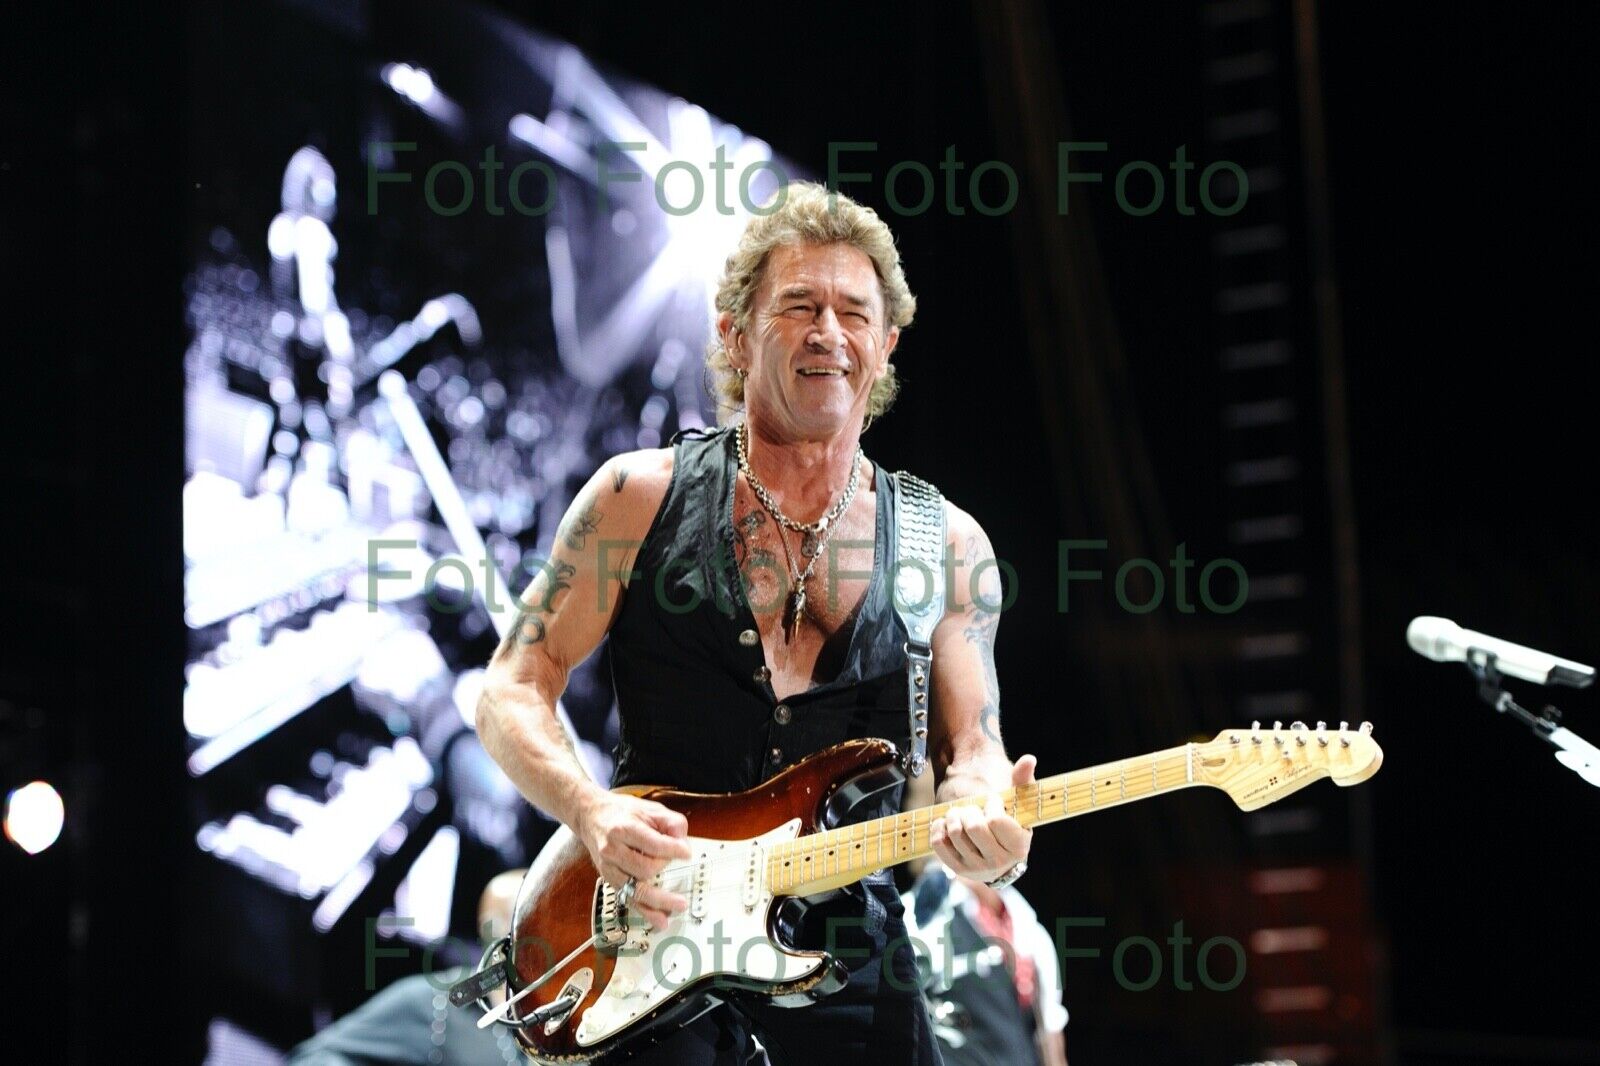 Peter Maffay Rock Pop Songs Music Photo Poster painting 20 X 30 CM Without Autograph (Be-2